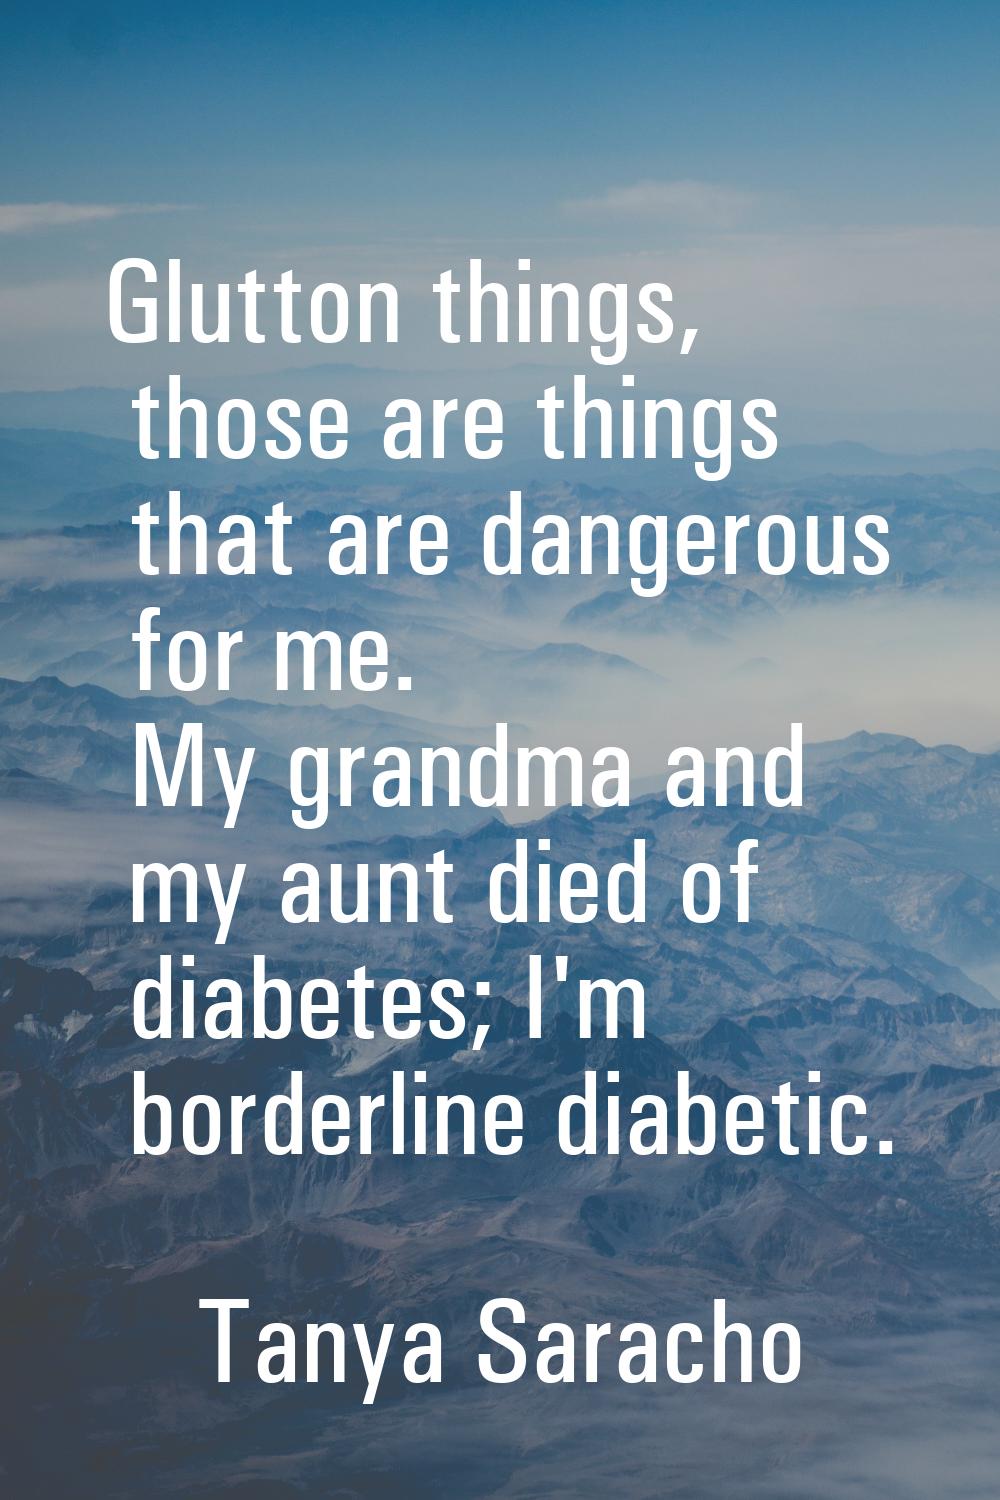 Glutton things, those are things that are dangerous for me. My grandma and my aunt died of diabetes